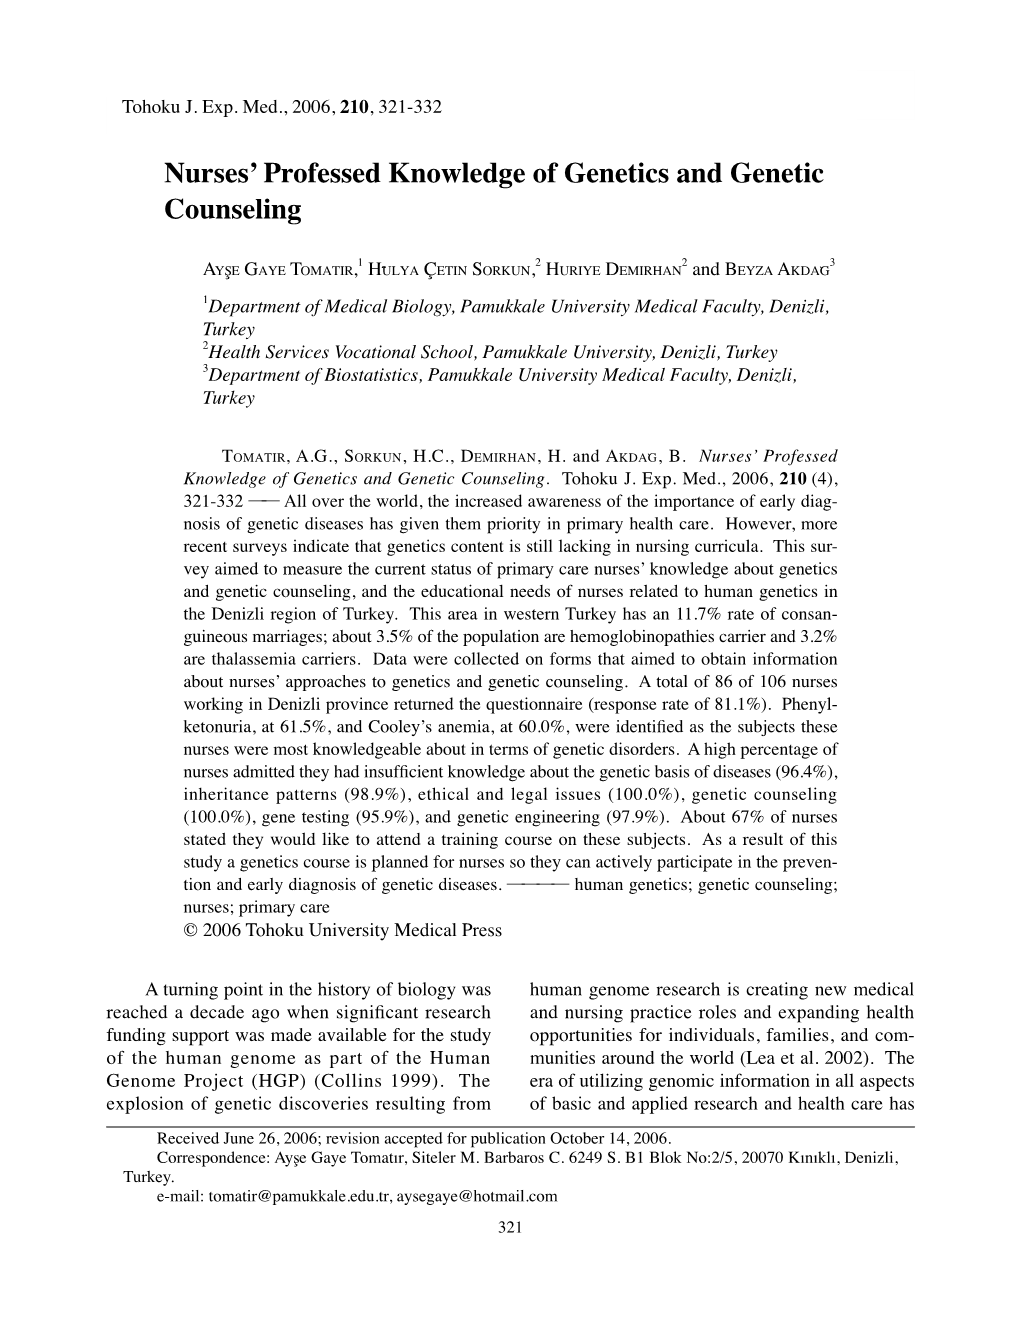 Nurses' Professed Knowledge of Genetics and Genetic Counseling